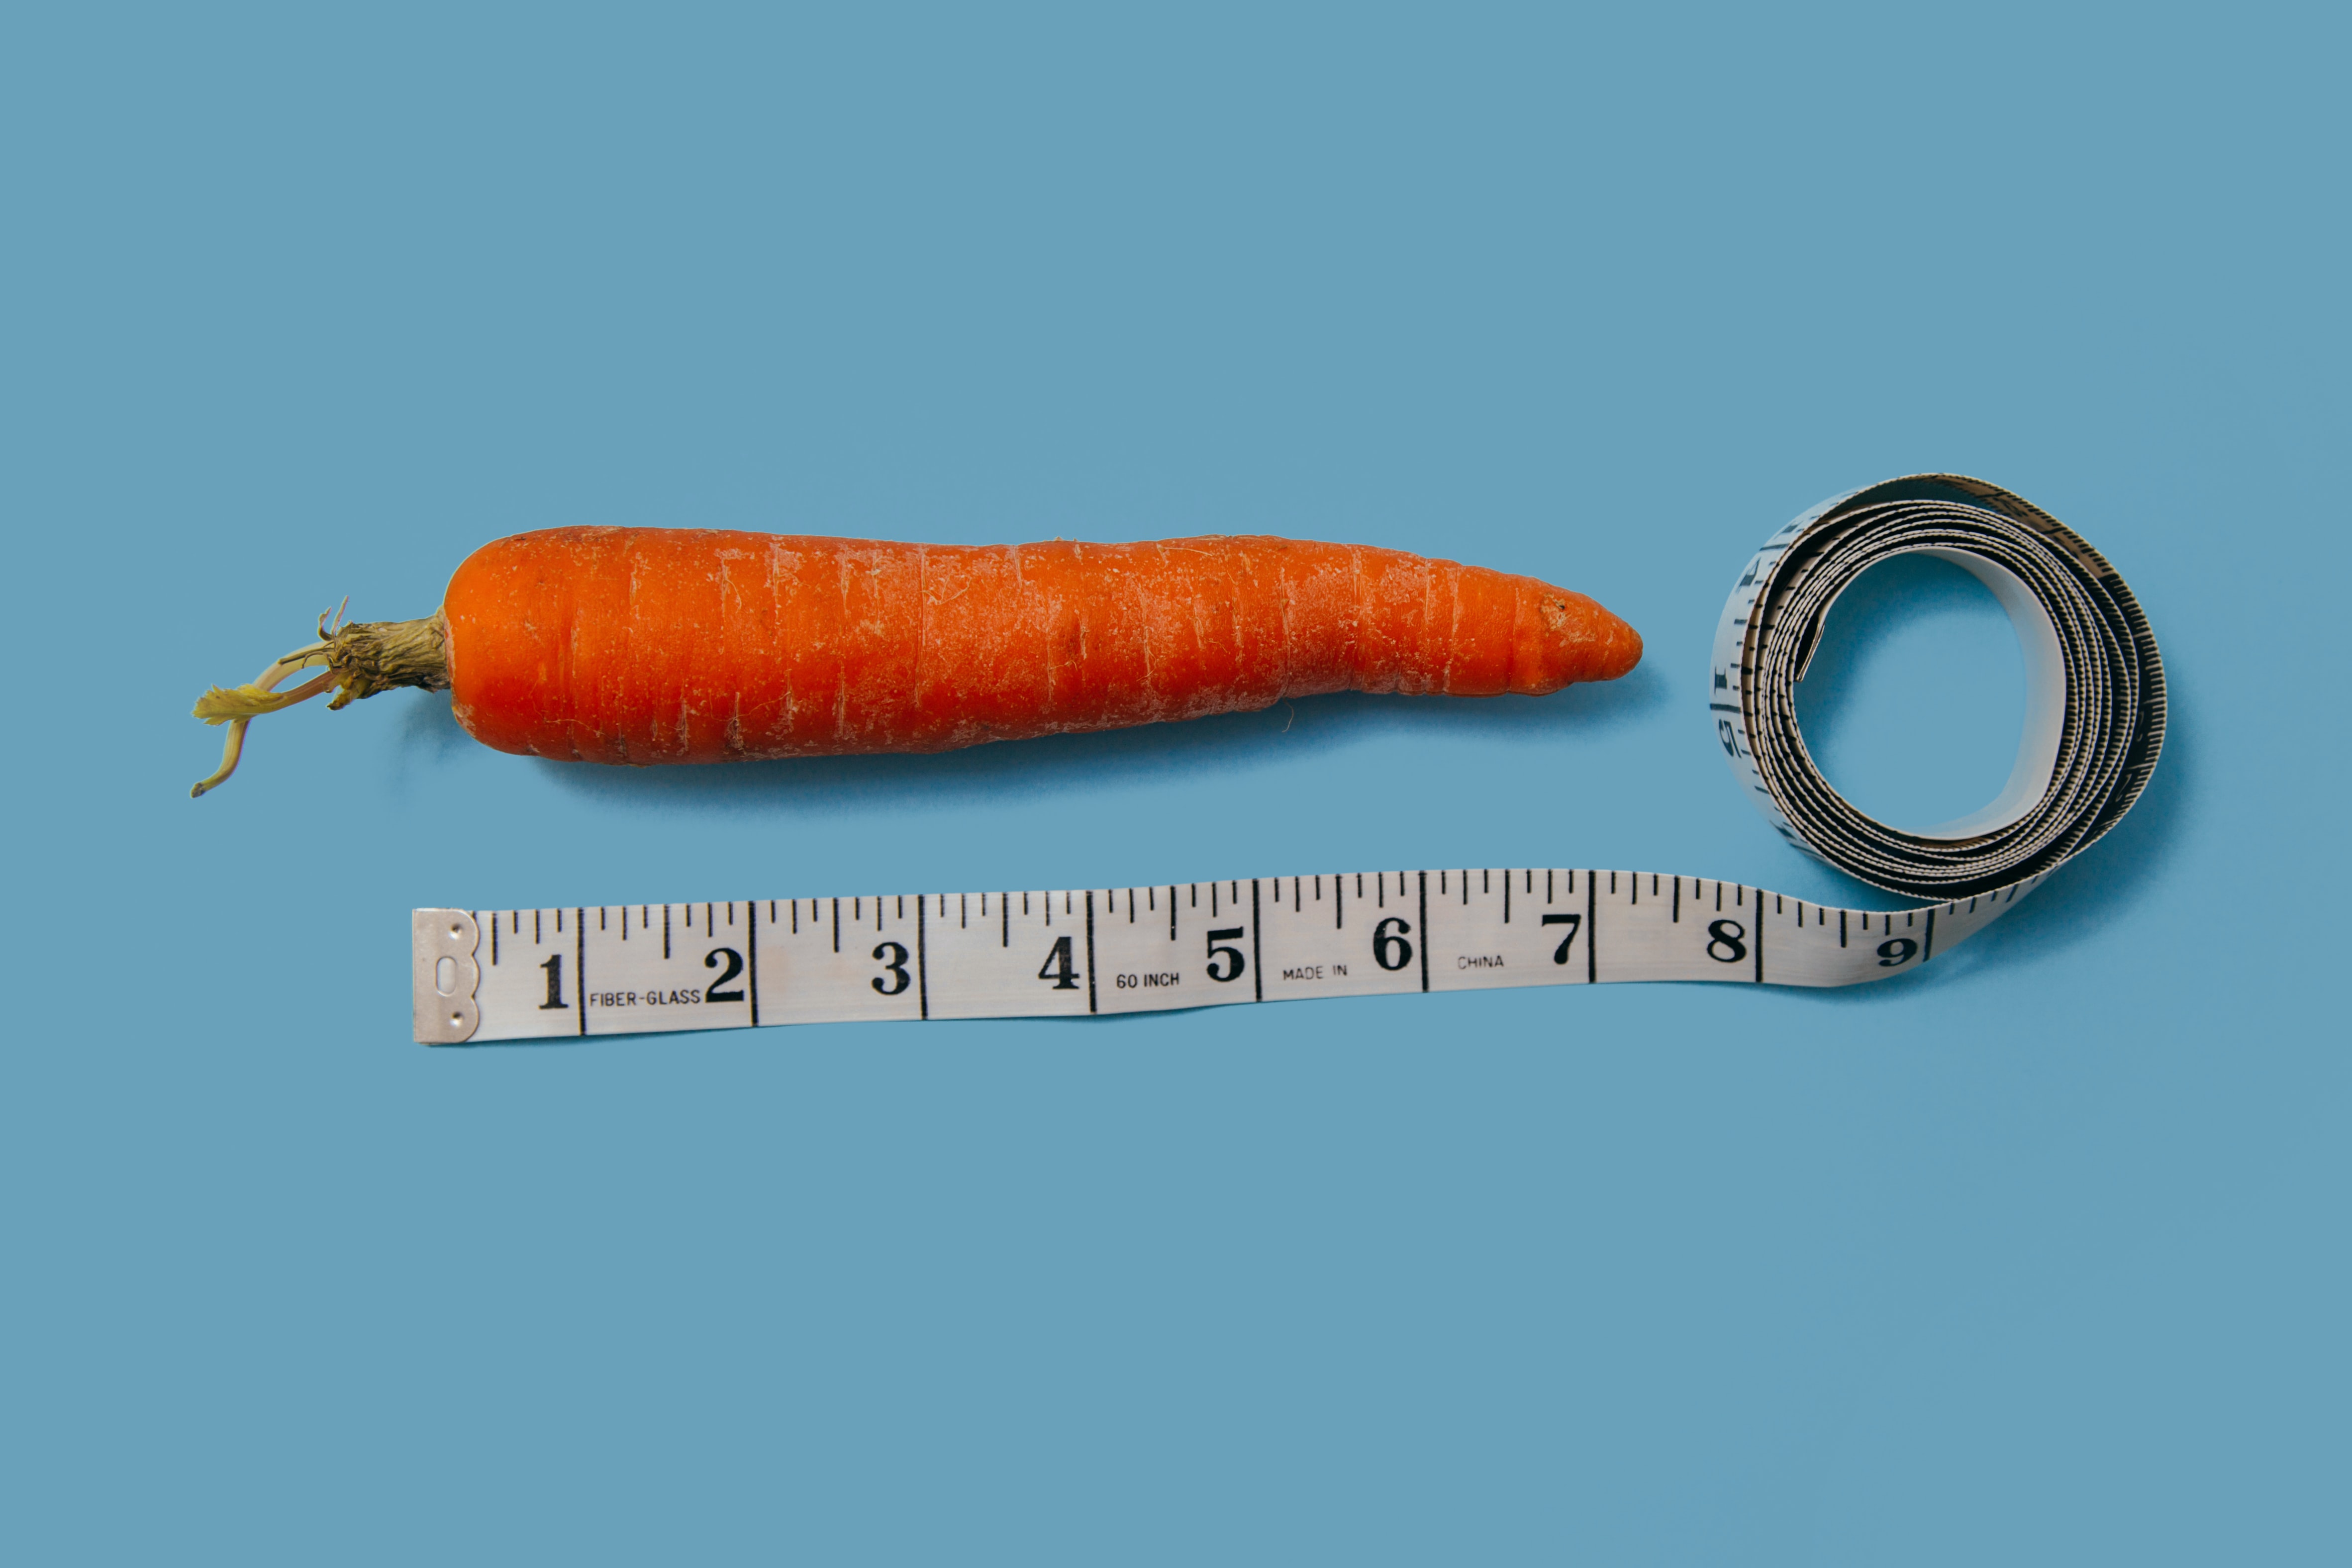 A carrot measured with a measuring tape as a metaphor for the research approach to how the bioeconomy in Europe should be measured.